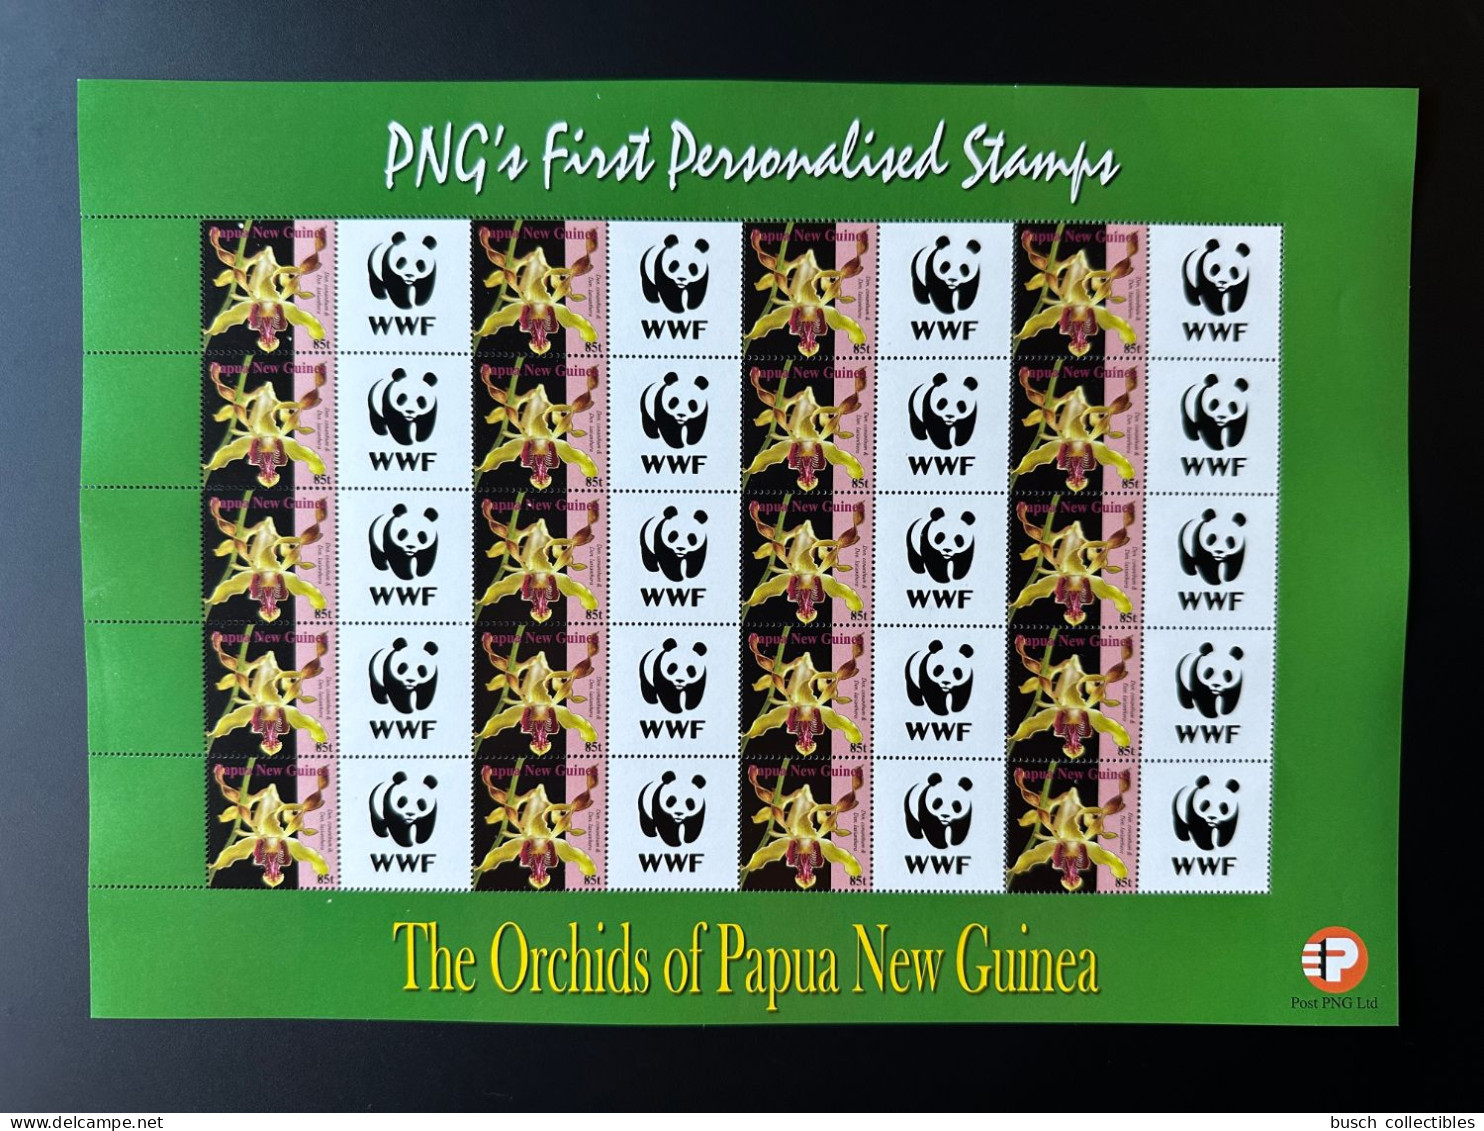 Papua New Guinea PNG 2007 Mi. 1244 Personalized WWF World Wide Fund For Nature Panda Faune Fauna Orchids Flowers - Orchidee